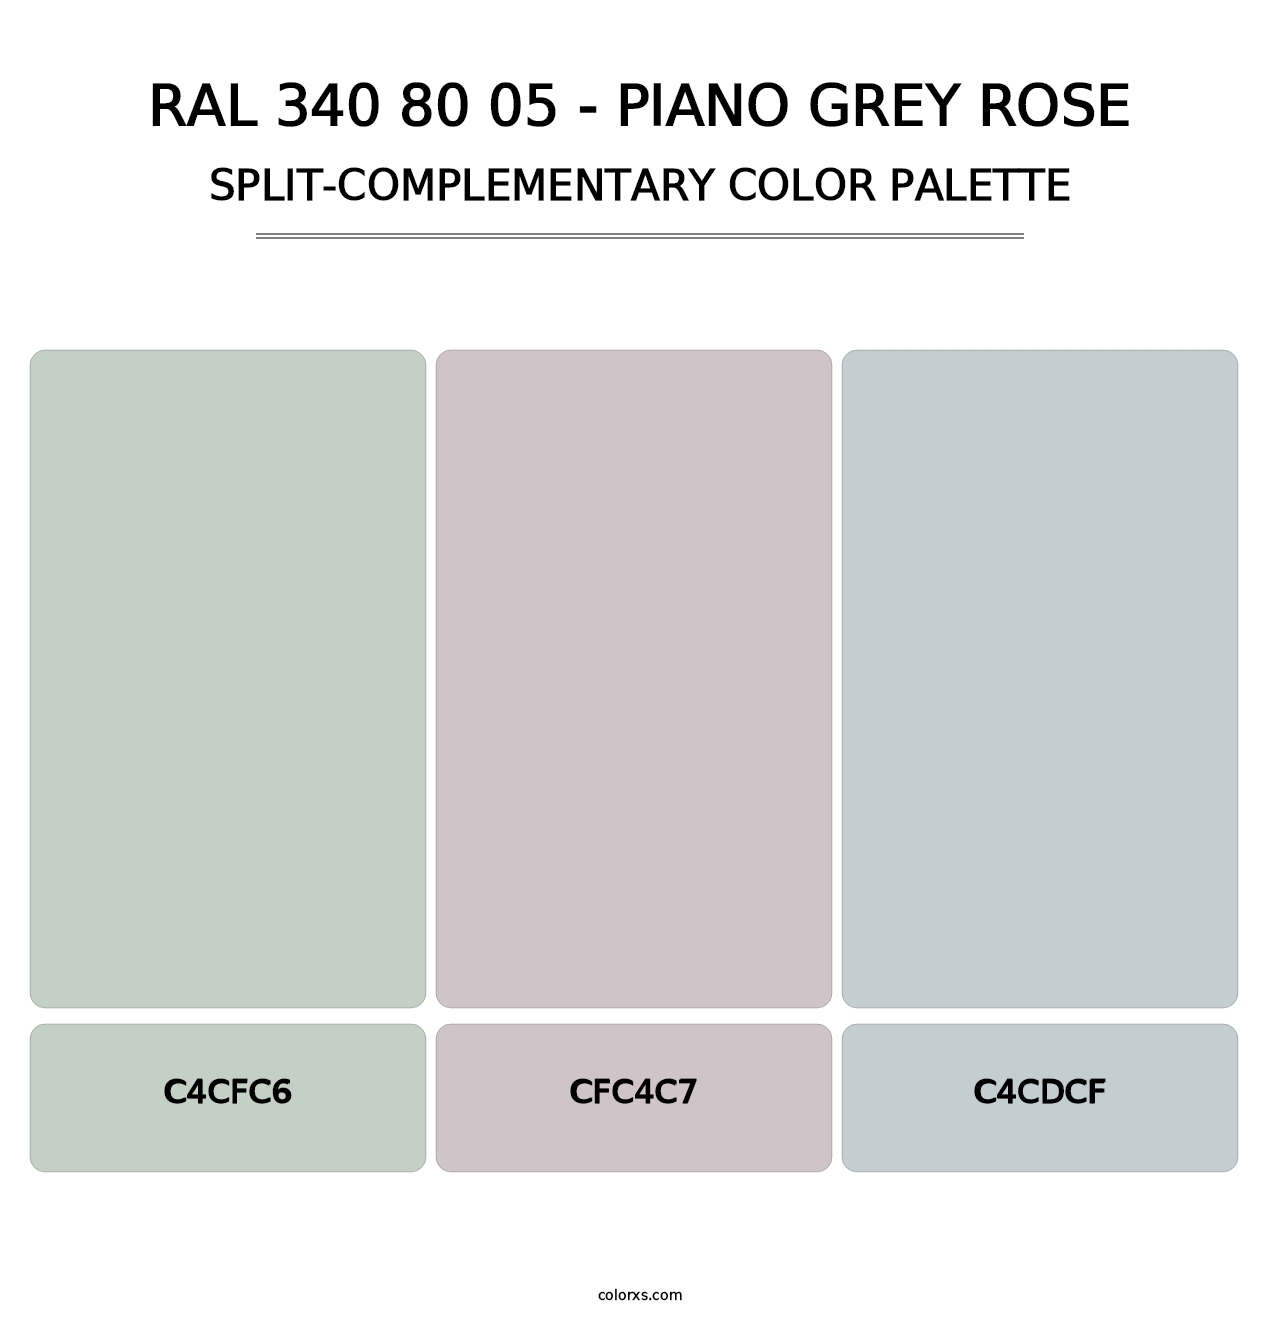 RAL 340 80 05 - Piano Grey Rose - Split-Complementary Color Palette